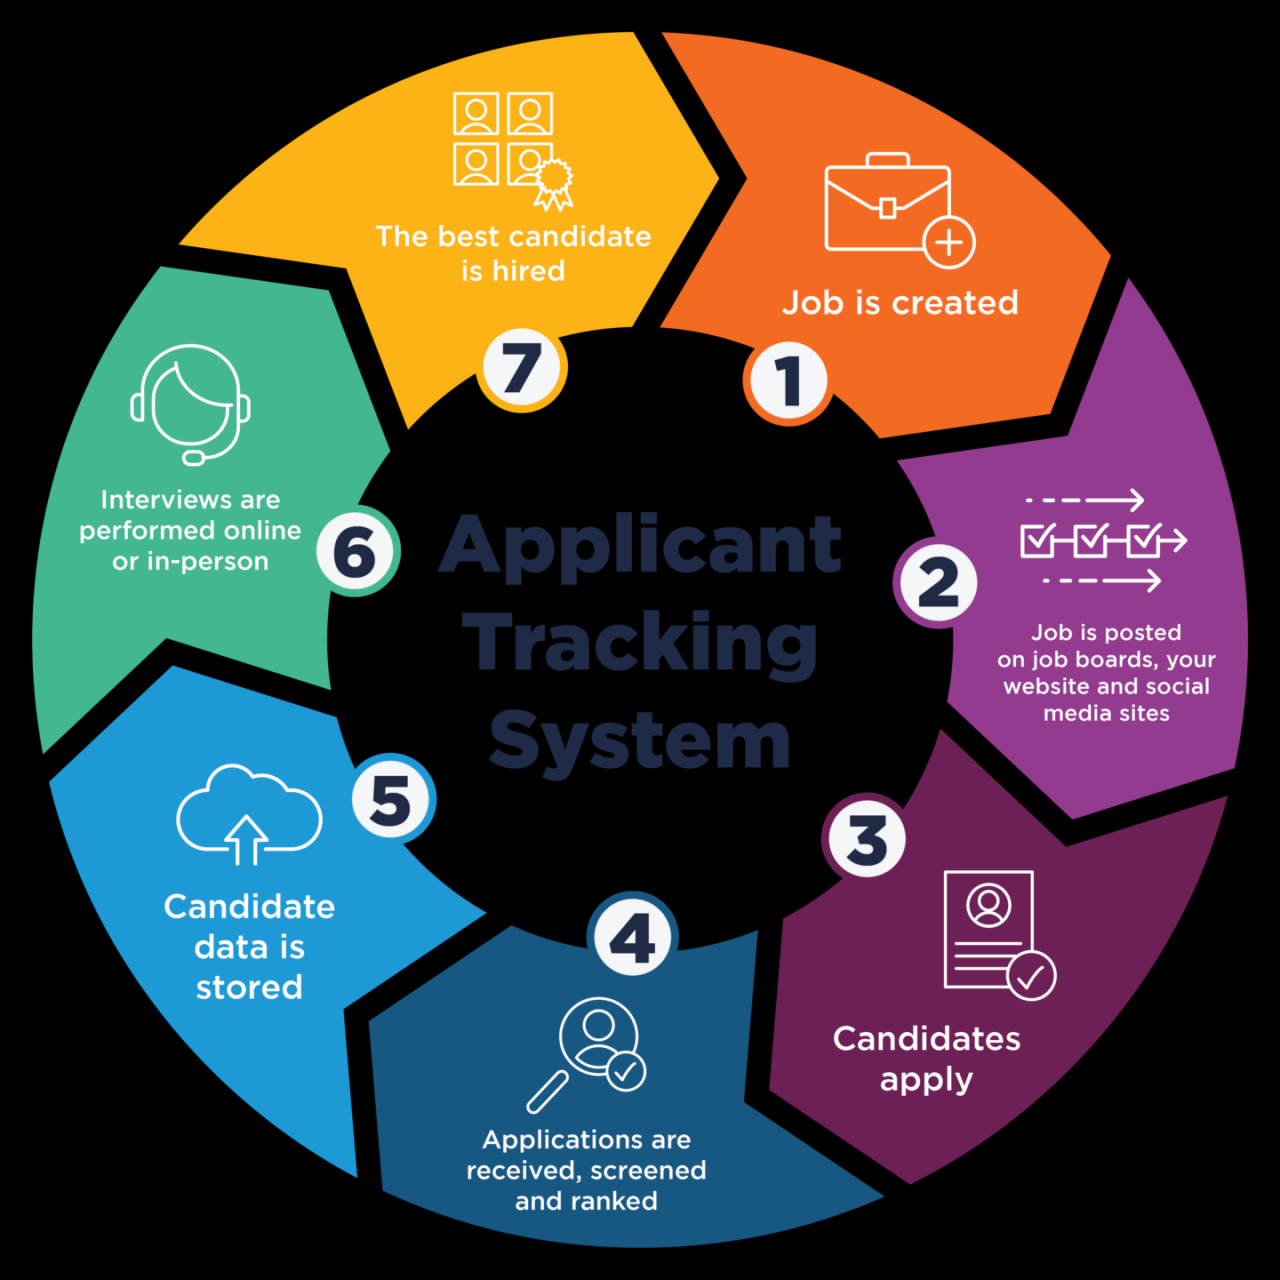 An applicant tracking system